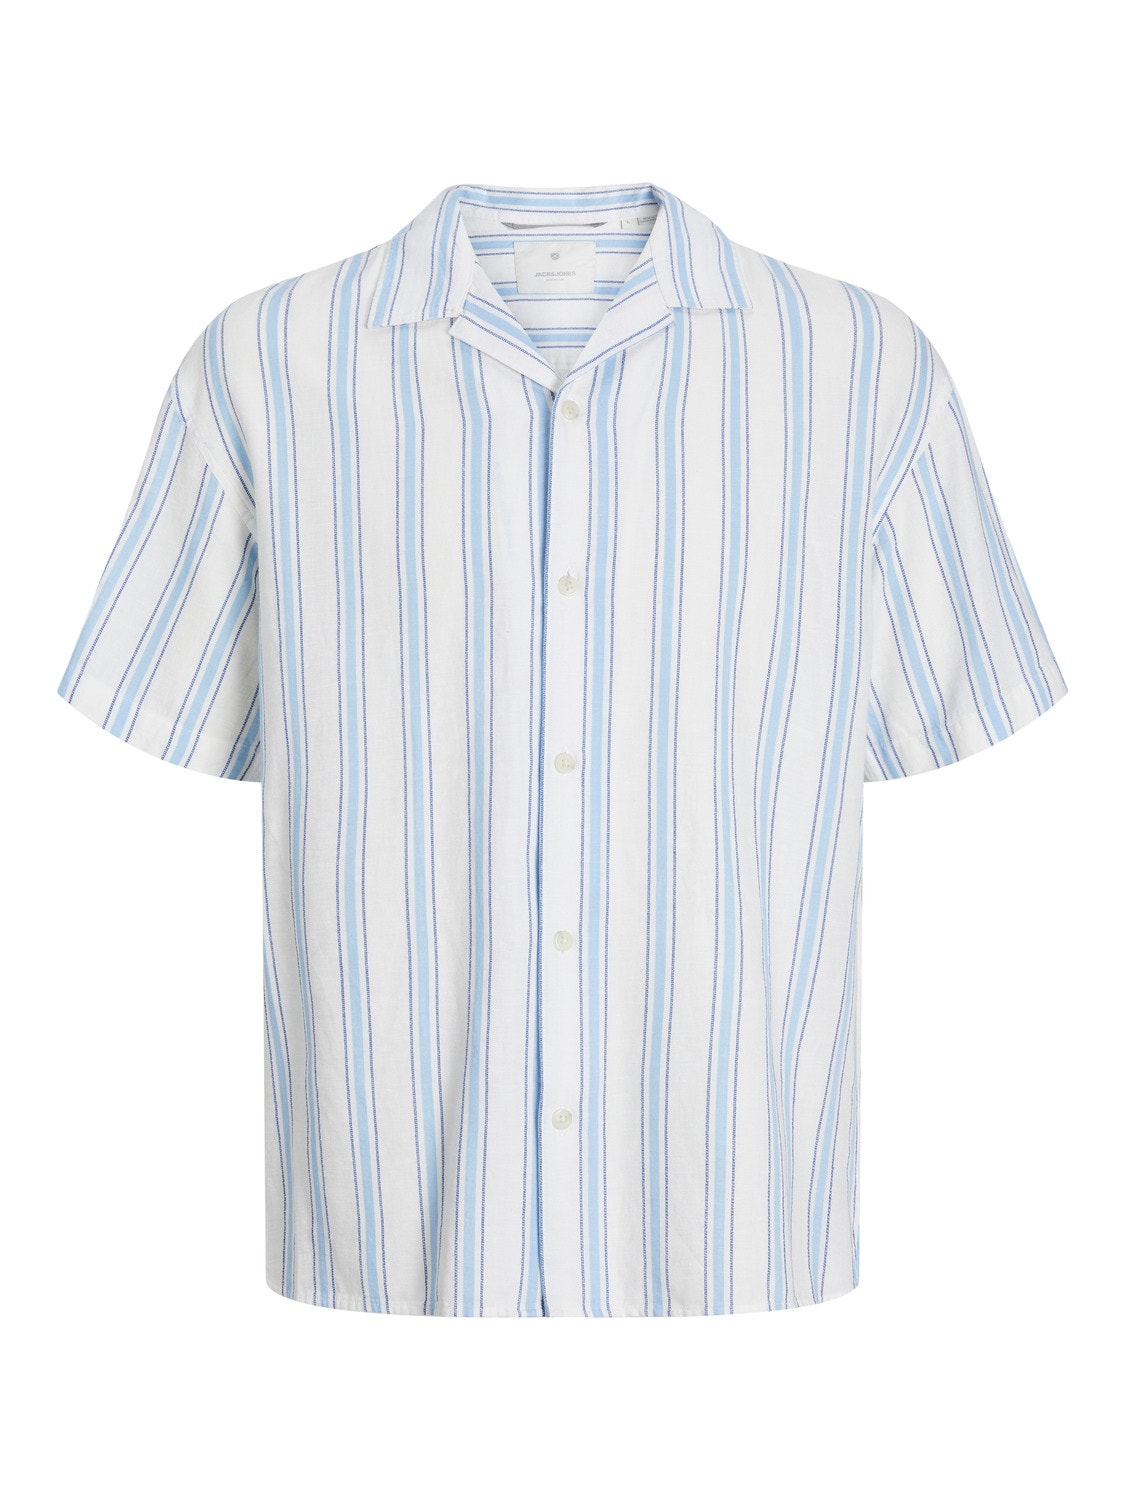 Jack & Jones Relaxed Fit Shirt -Palace Blue - 12255818